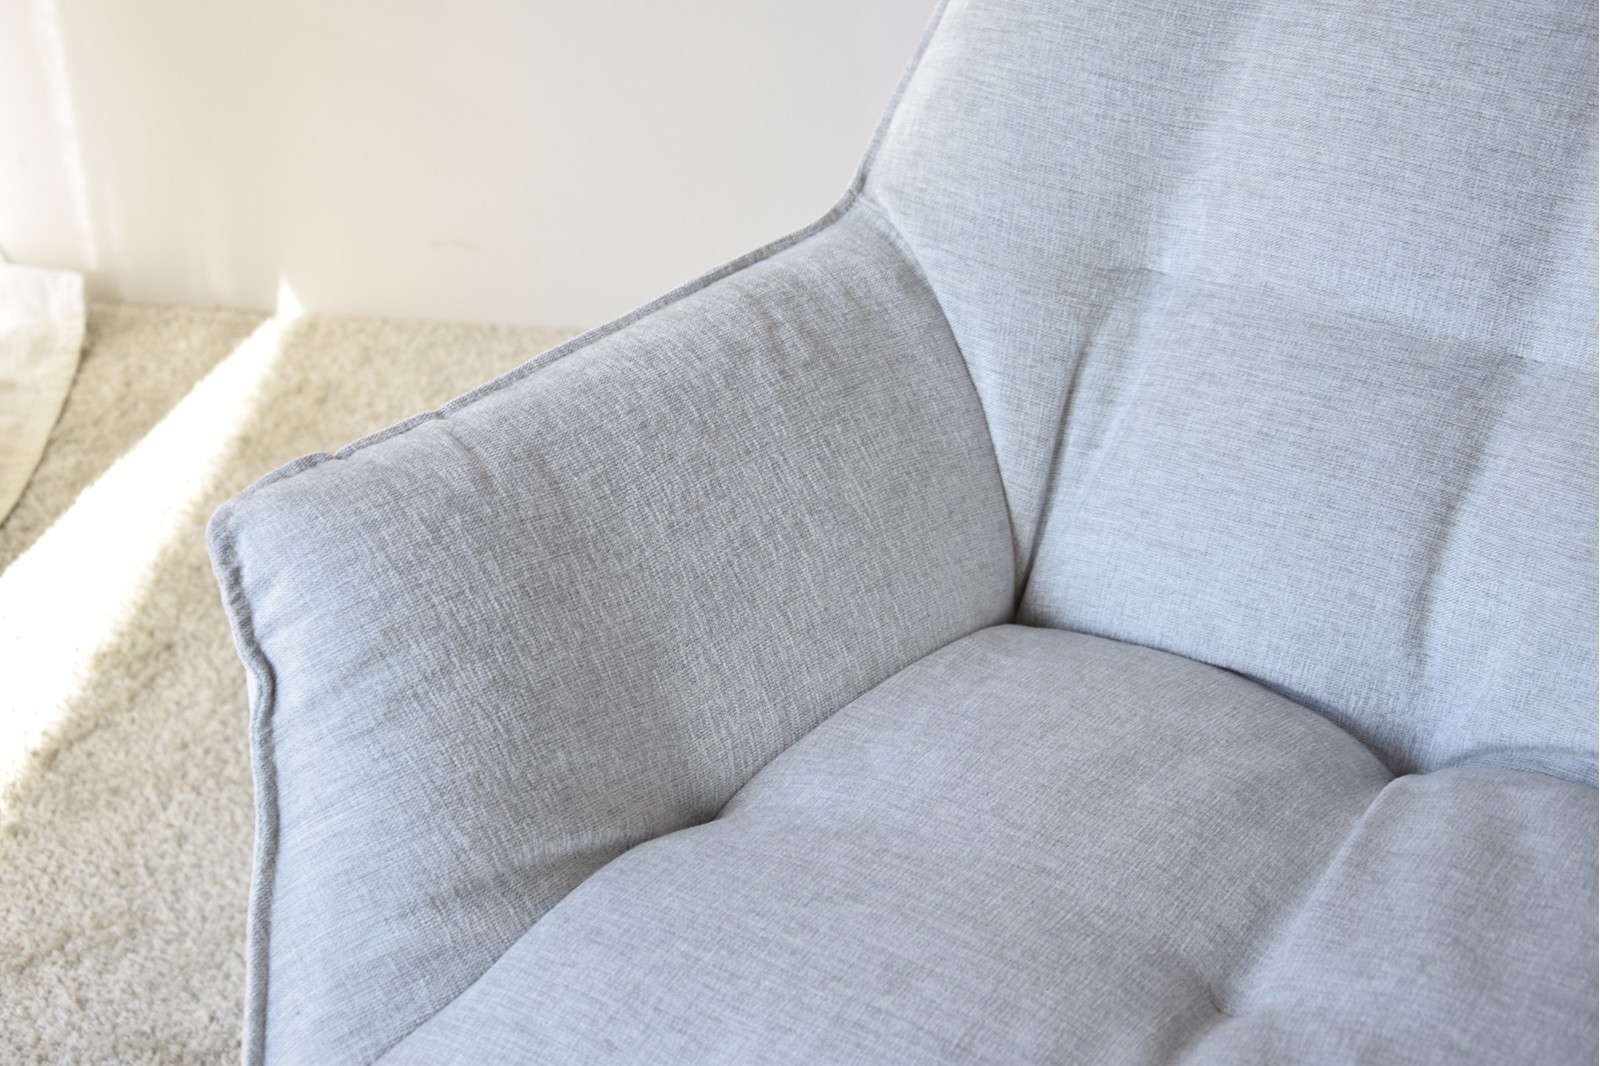 ARMCHAIR. HIGH BACKREST AND SOFT GREY TONES